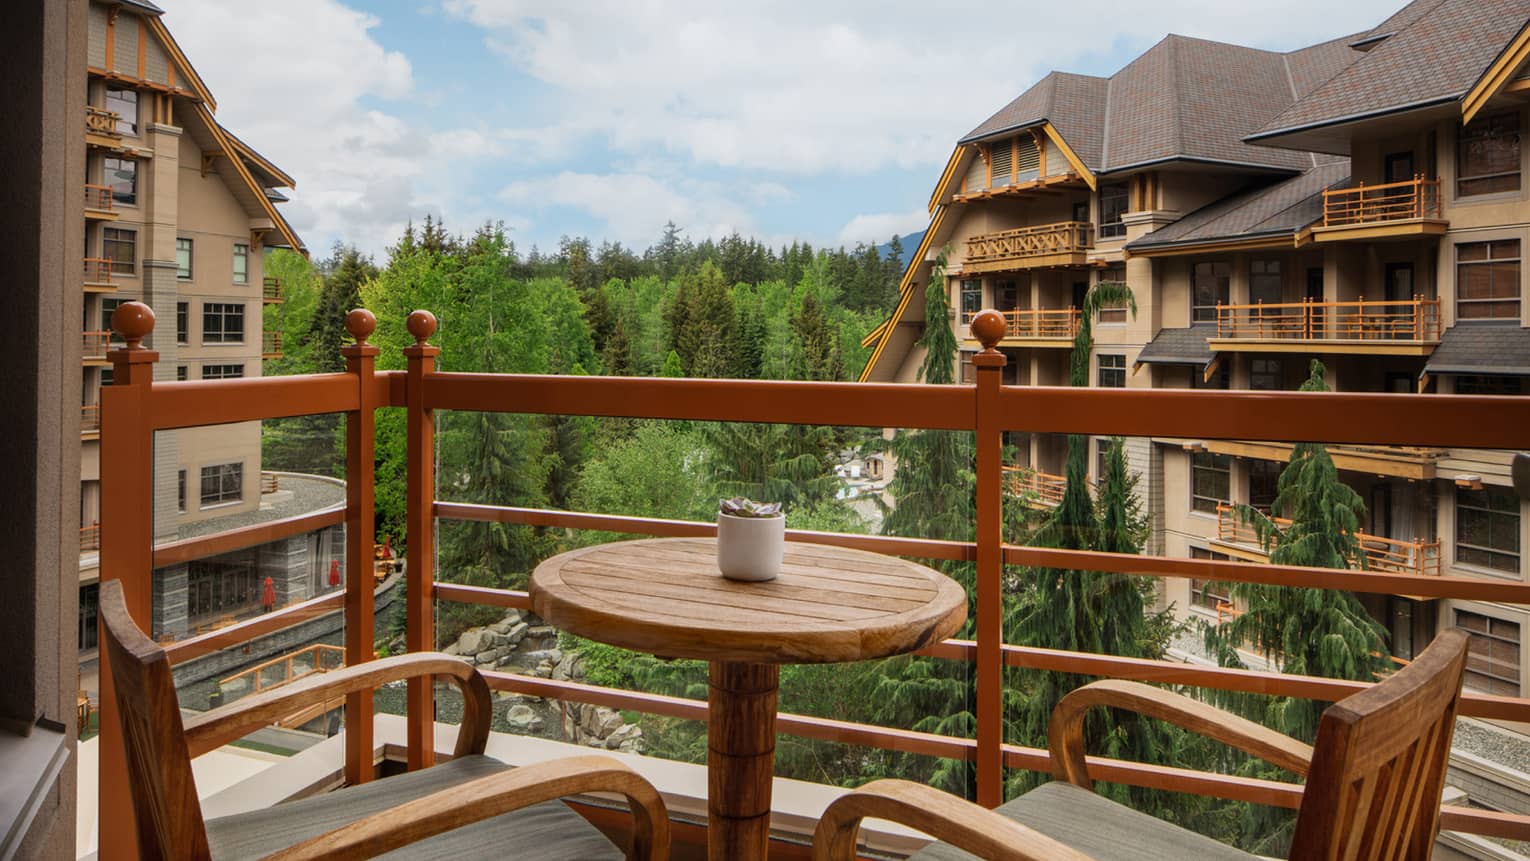 A picturesque view from a balcony of a Mountain View room at the Four Seasons Whistler. The balcony is furnished with wooden chairs and a round table, perfect for enjoying the outdoors. It overlooks other chalet-style buildings amid a lush green forest backdrop, highlighting the serene and natural setting of the resort.